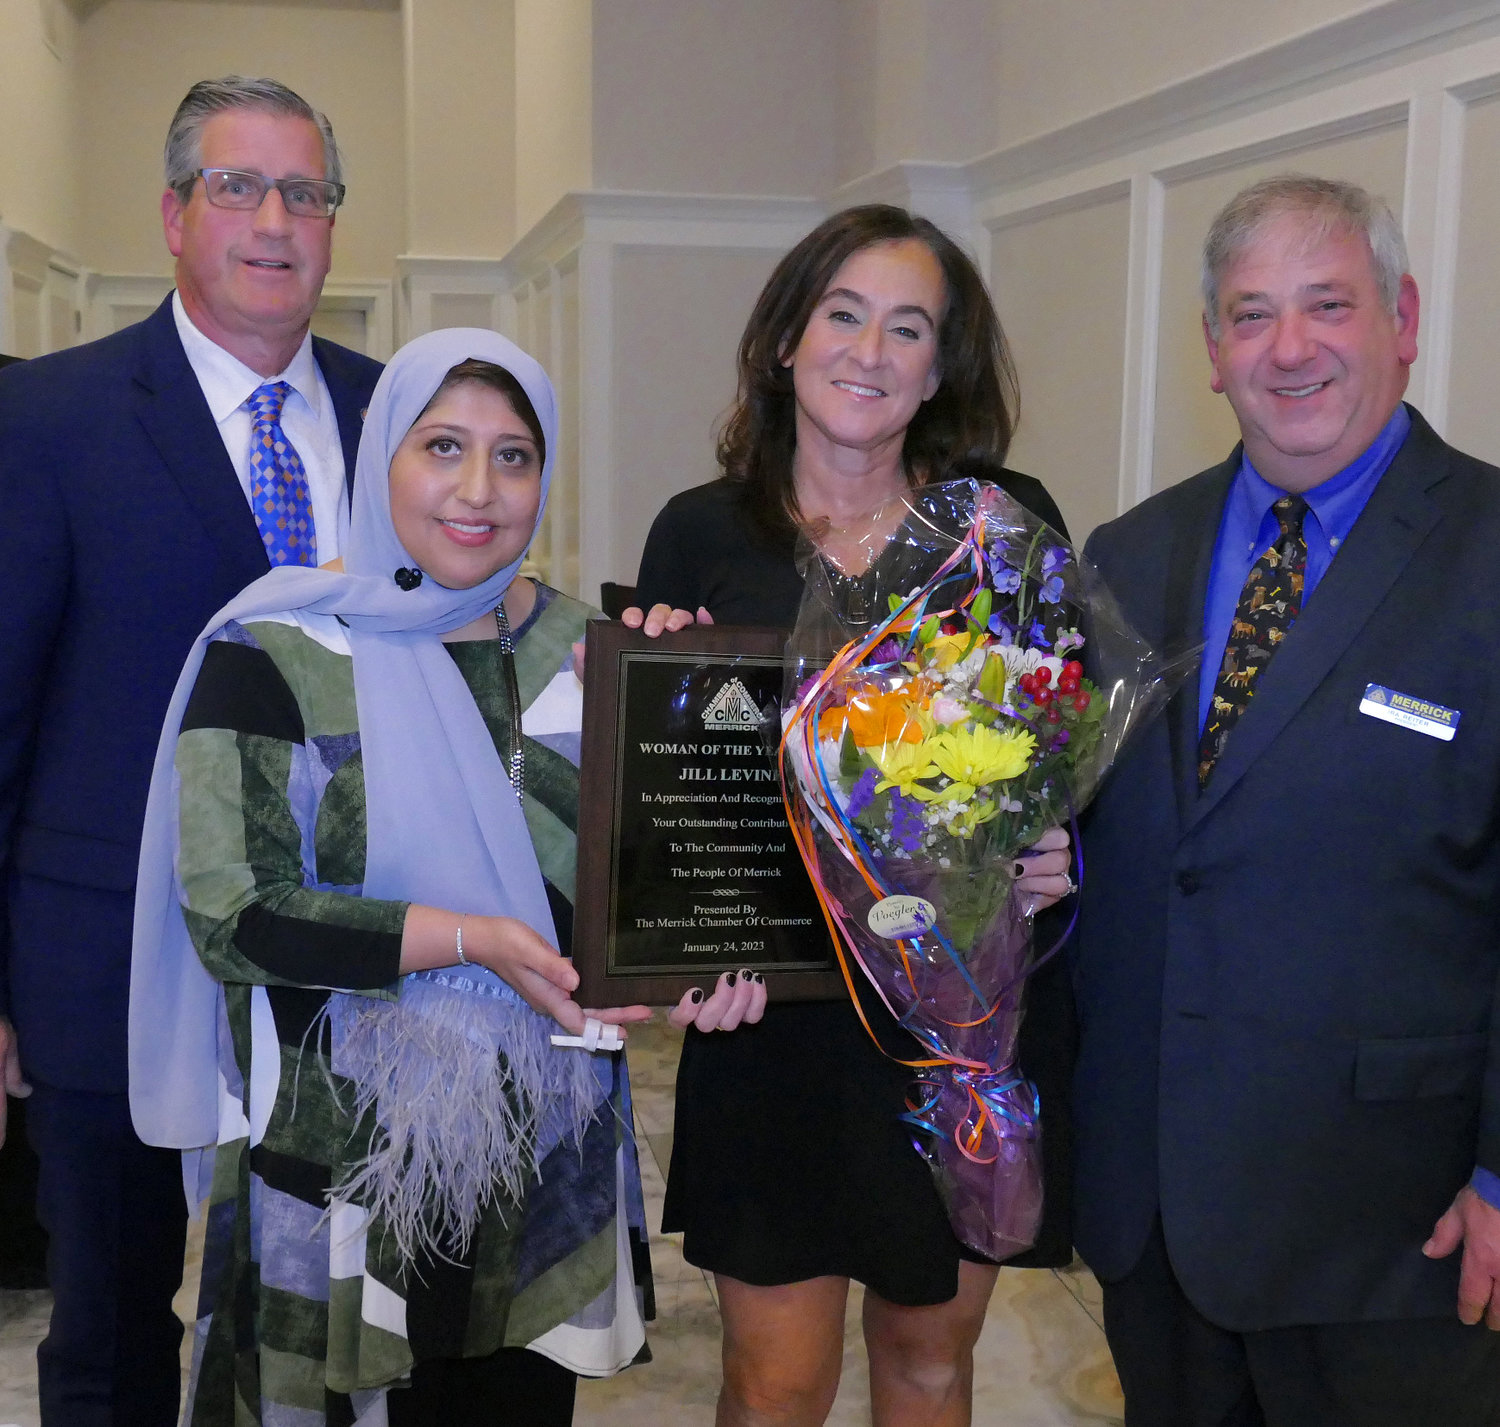 Mills, past president Femy Aziz, and Reiter honored one of the Women of the Year, Jill Levine.